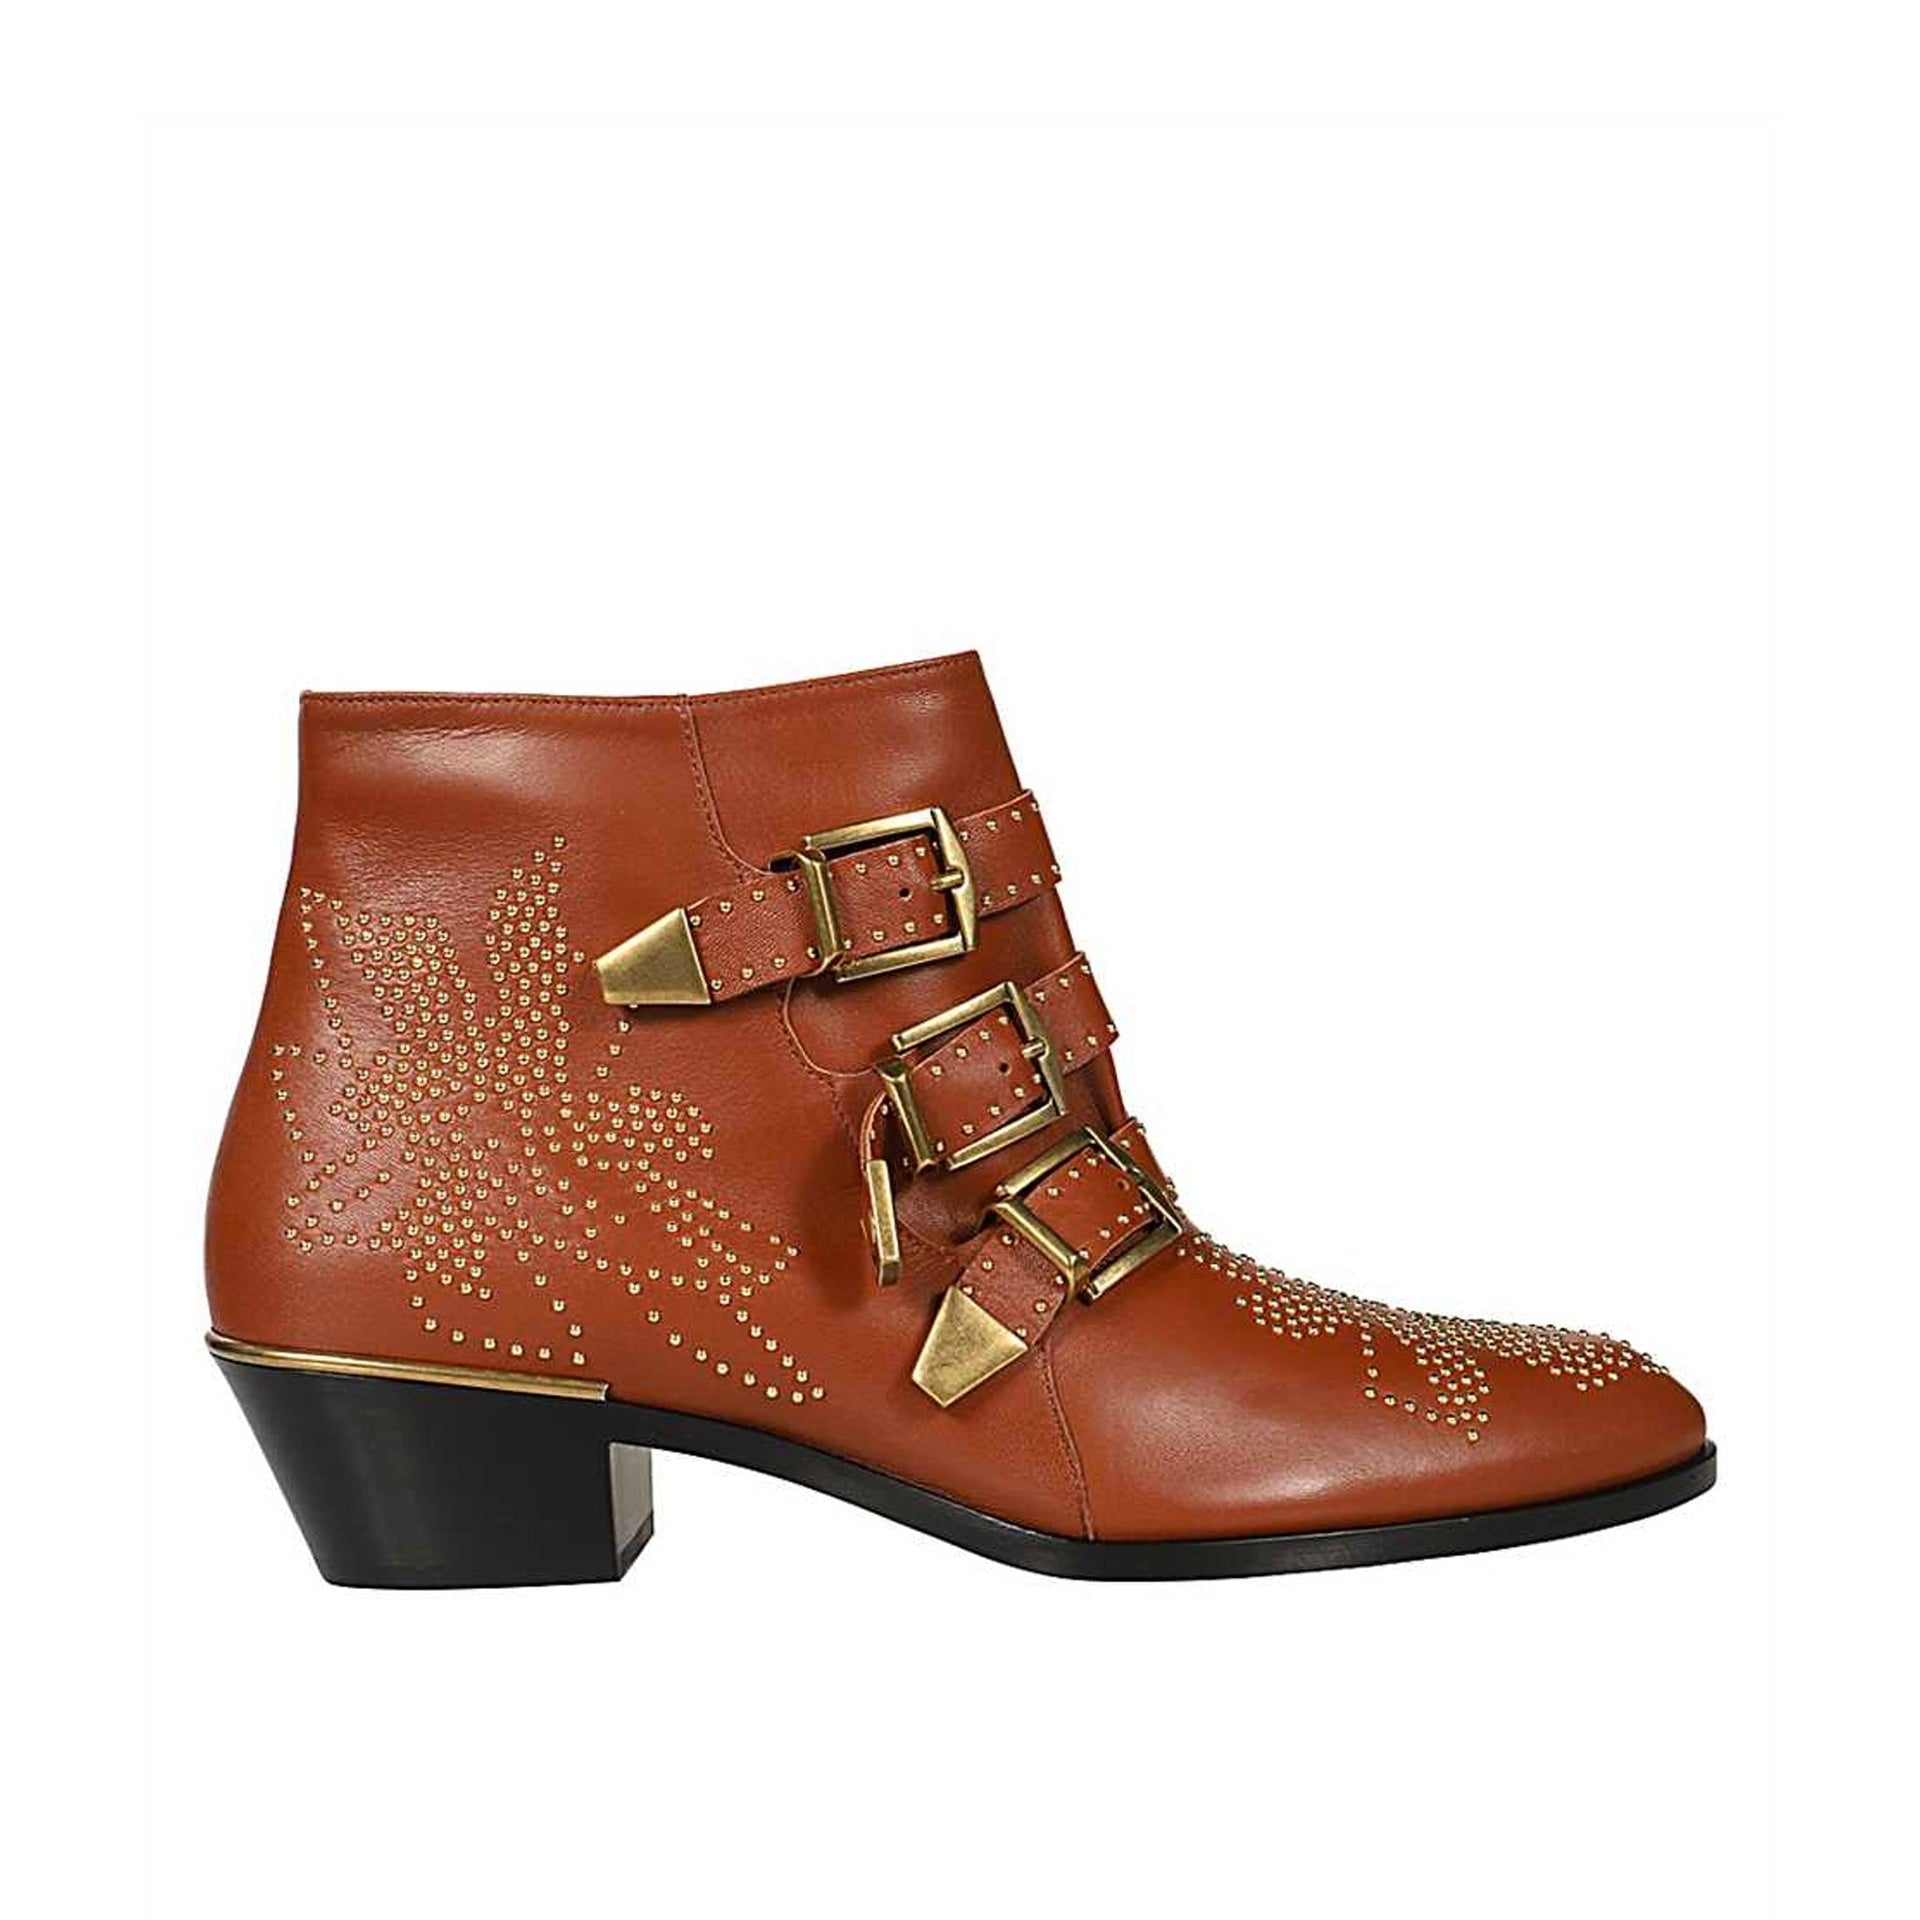 CHLOE-OUTLET-SALE-Chloe-Leather-Susanna-Boots-Stiefel-Stiefeletten-BROWN-38_5-ARCHIVE-COLLECTION.jpg